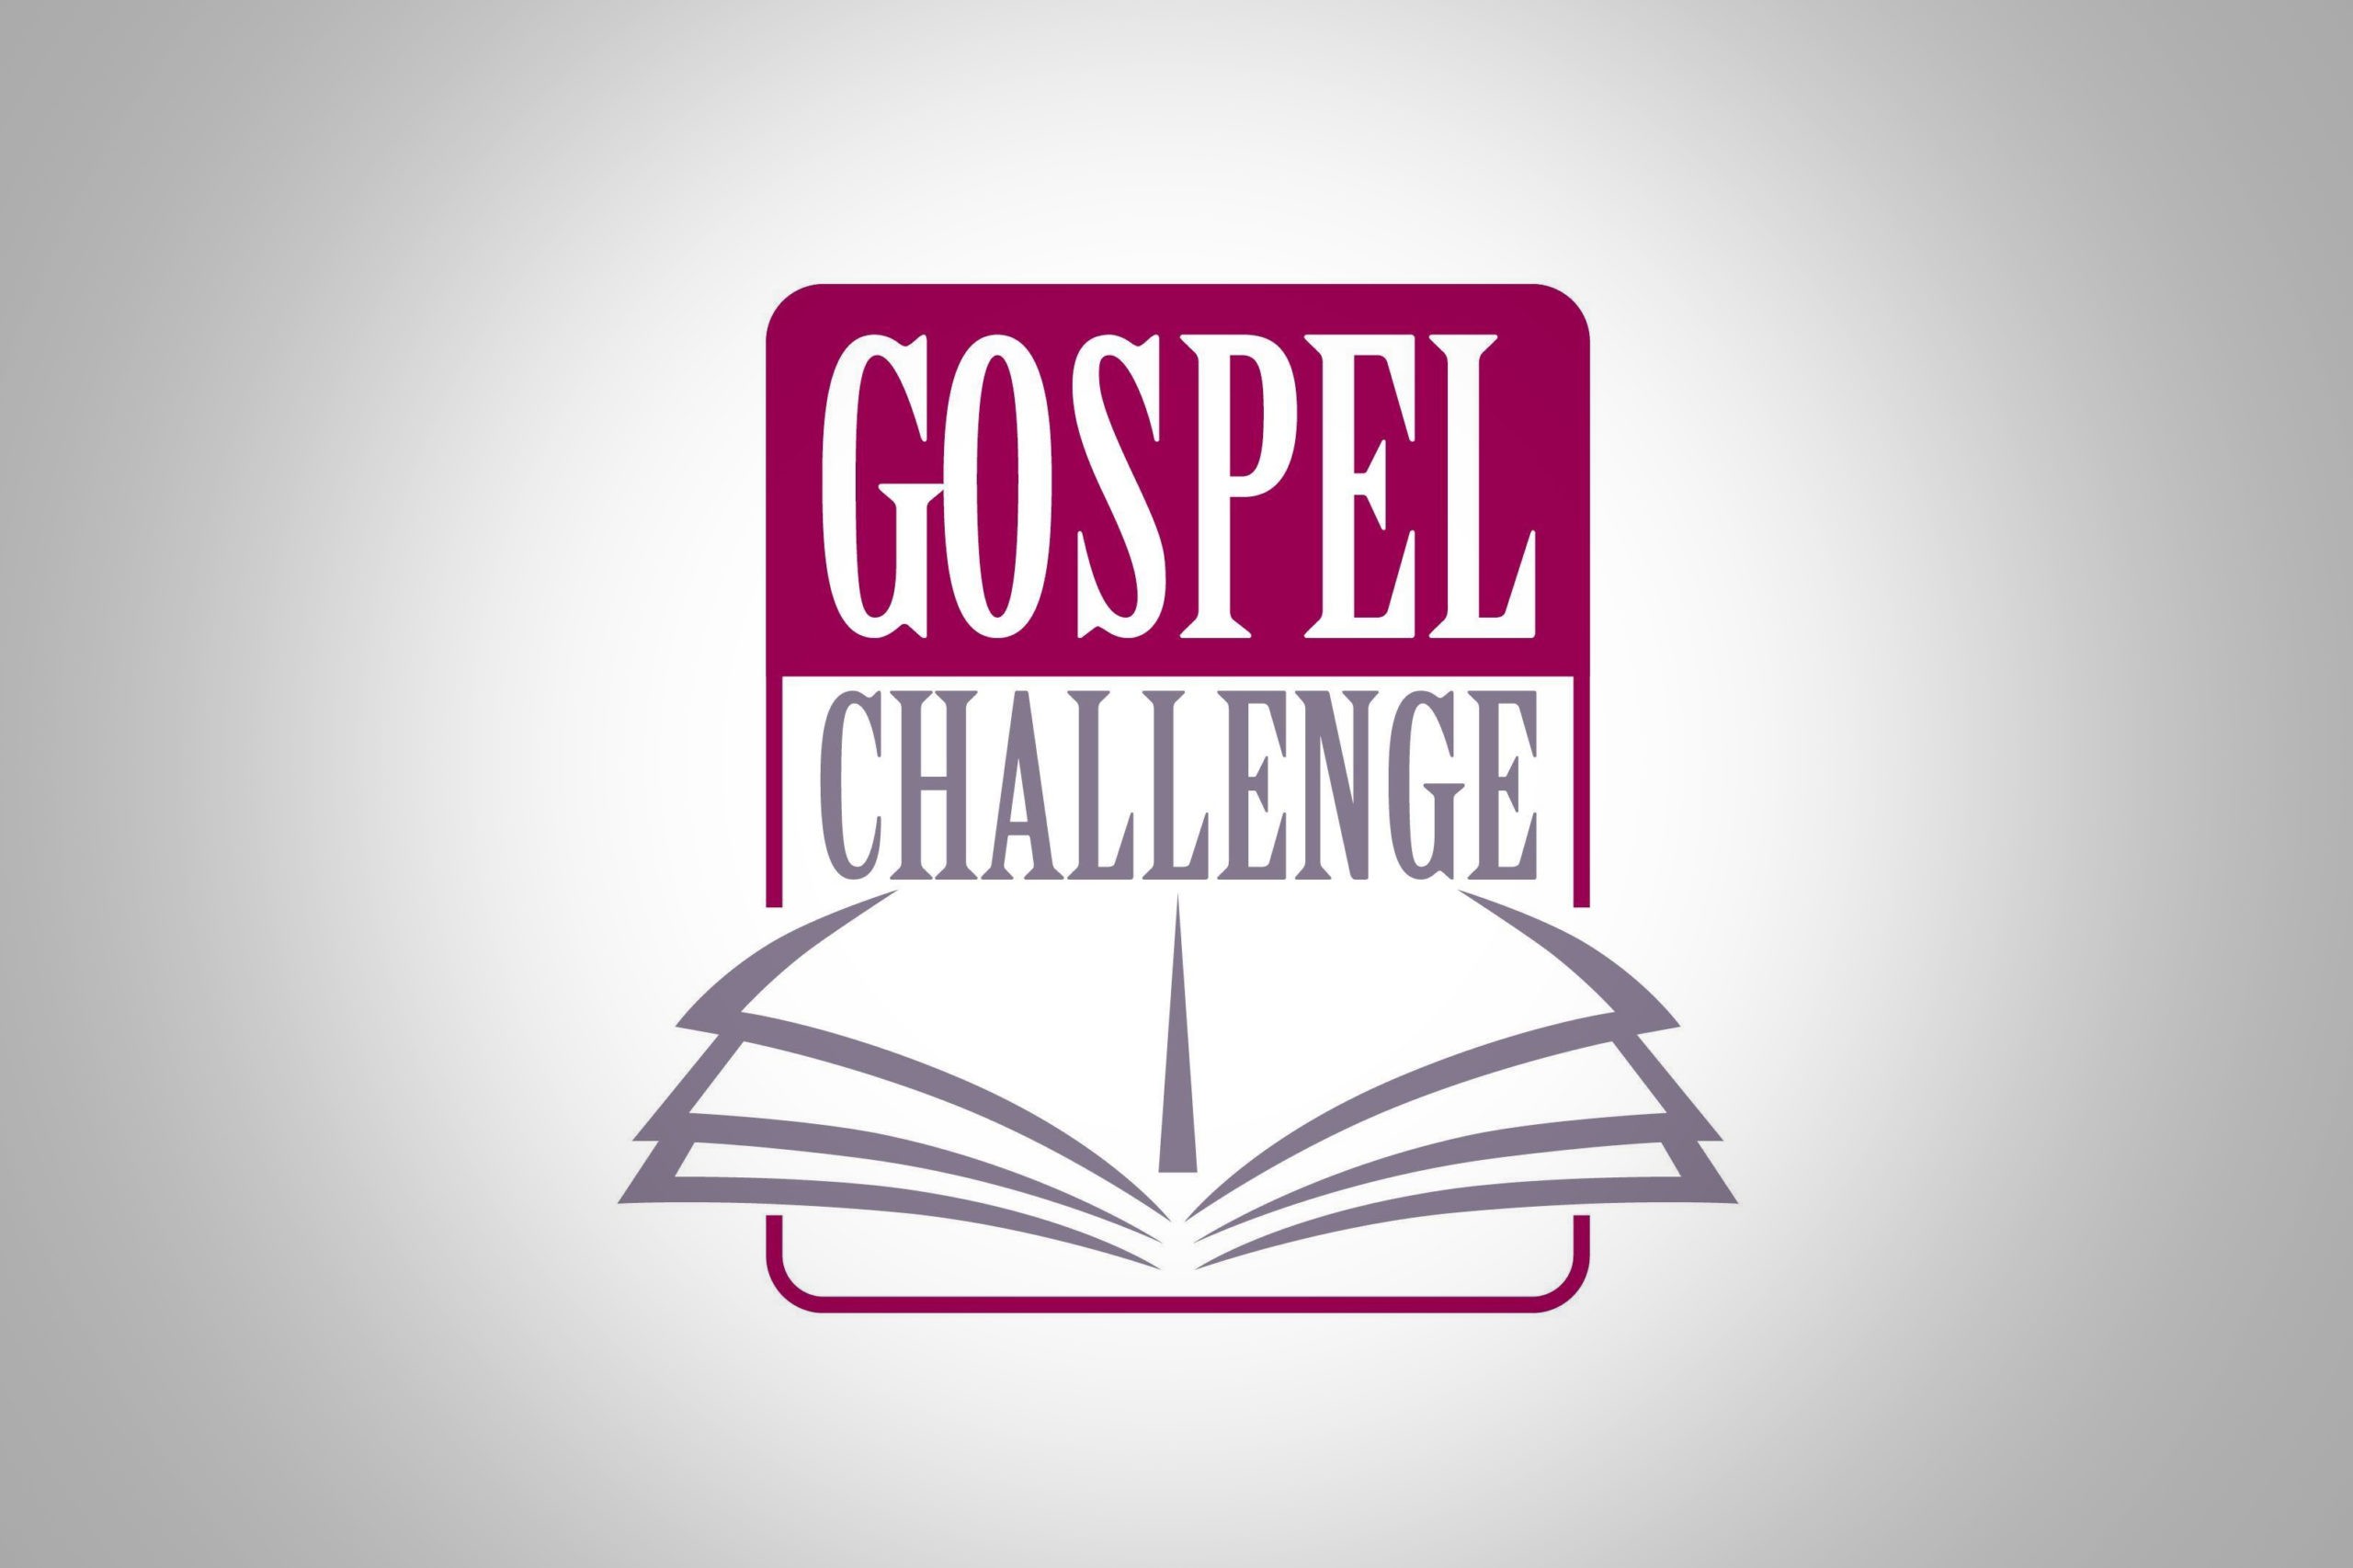 The Gospel Challenge - With the uncertainty created by the pandemic, people need the hope of Jesus more than ever this Easter.